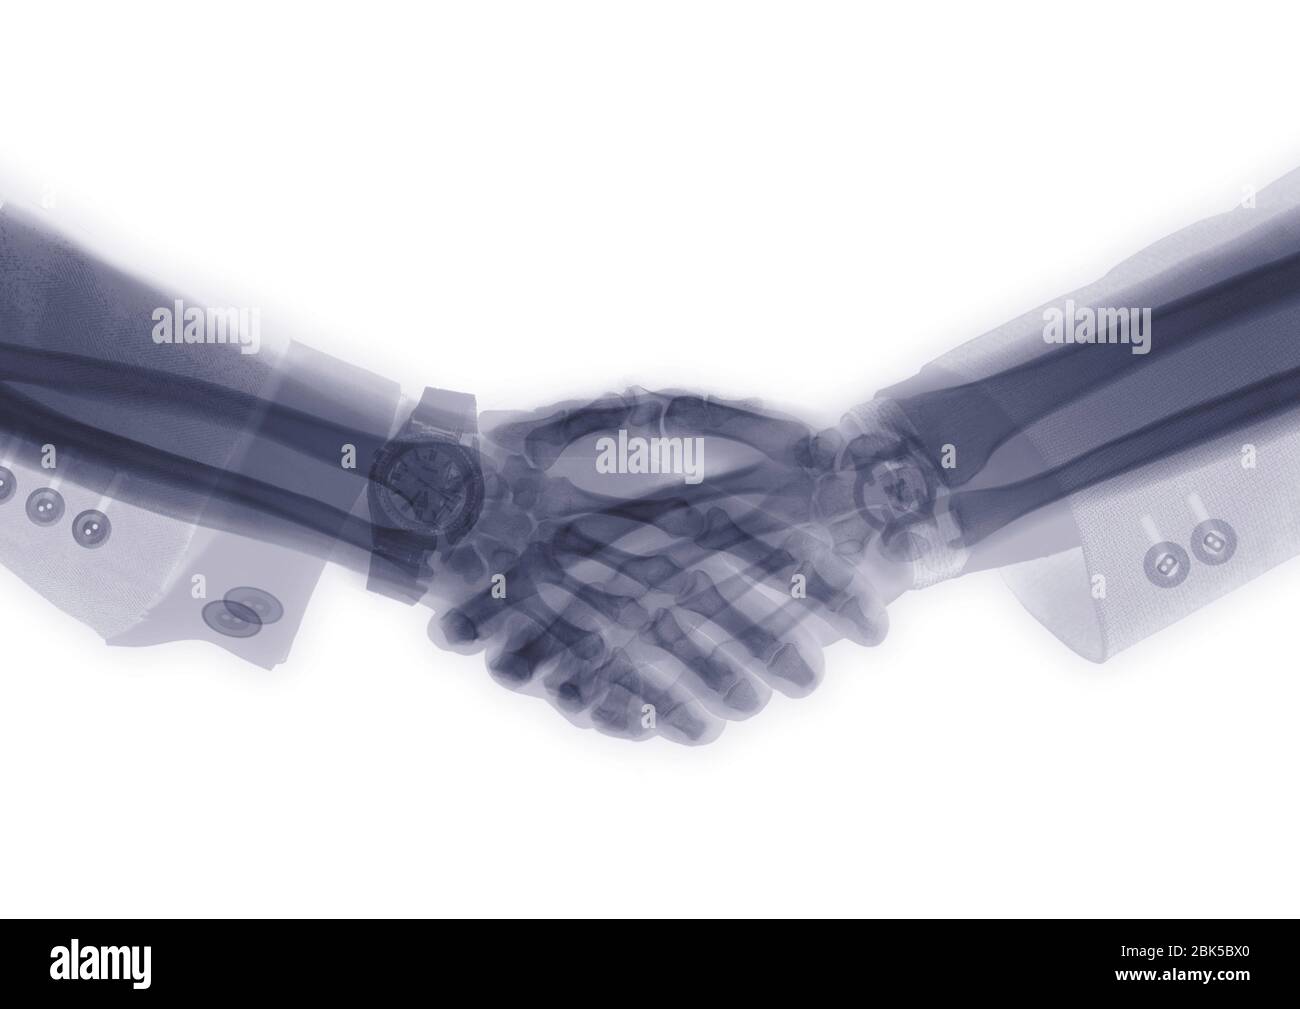 Two executive shaking hands, X-ray. Stock Photo